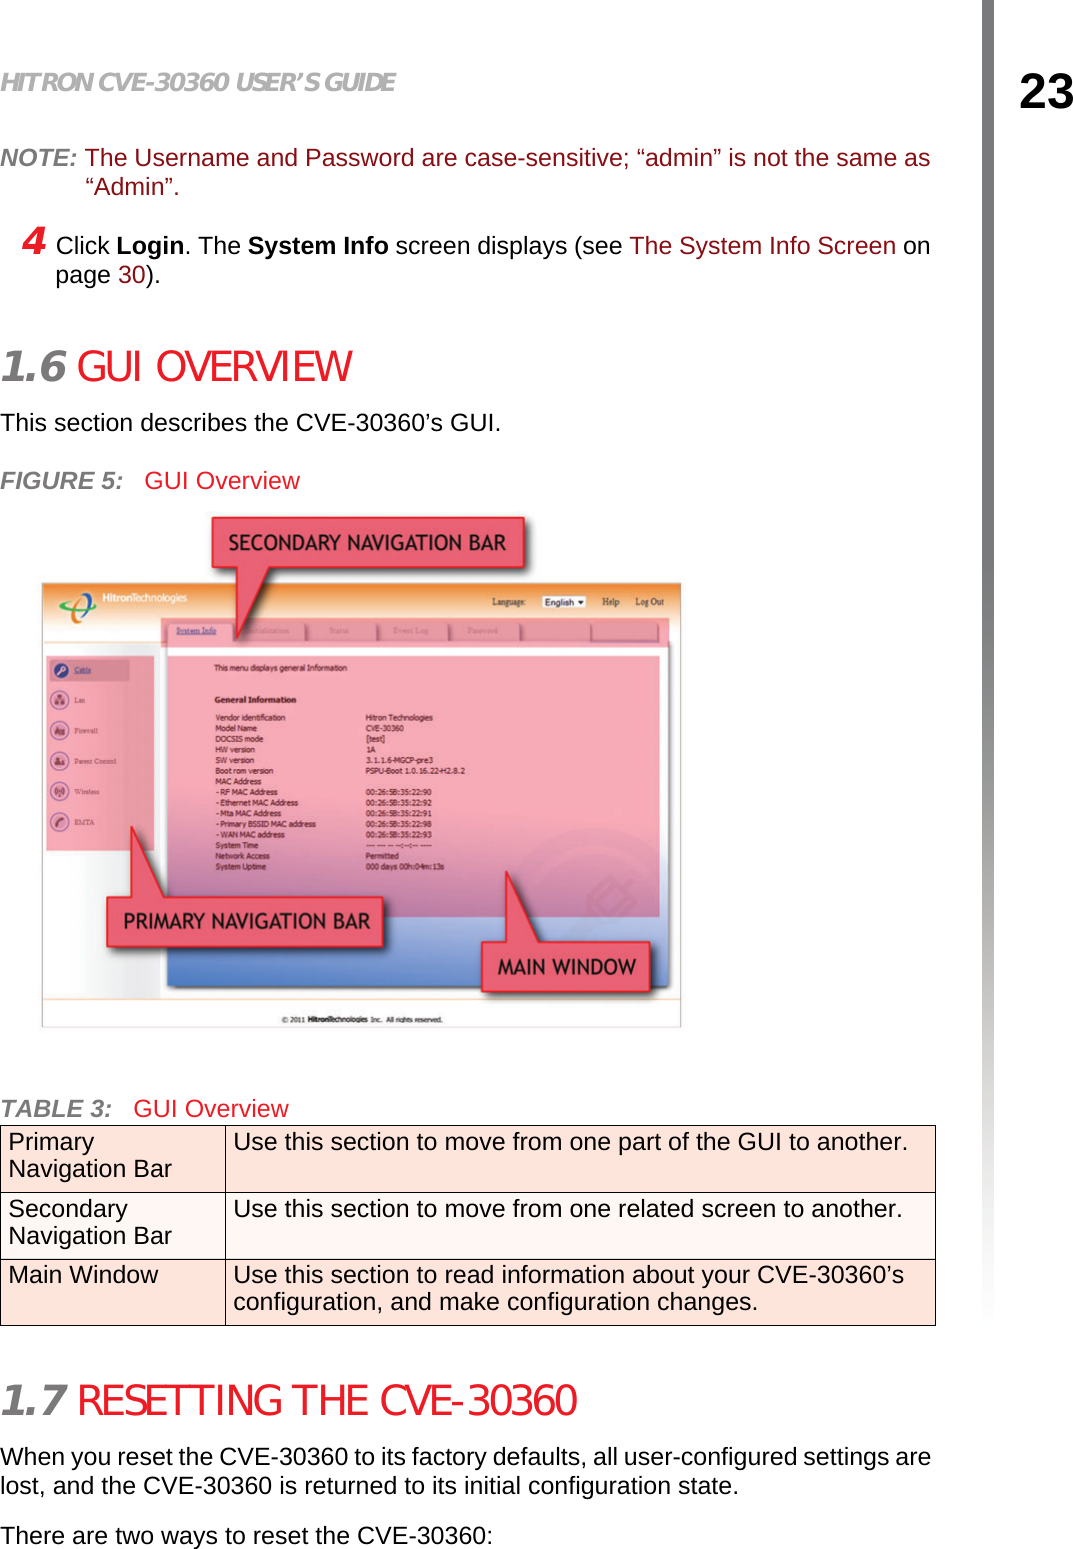 23HITRON CVE-30360 USER’S GUIDEINTRODUCTIONNOTE: The Username and Password are case-sensitive; “admin” is not the same as “Admin”.4 Click Login. The System Info screen displays (see The System Info Screen on page 30).1.6 GUI OVERVIEWThis section describes the CVE-30360’s GUI.FIGURE 5:   GUI Overview1.7 RESETTING THE CVE-30360When you reset the CVE-30360 to its factory defaults, all user-configured settings are lost, and the CVE-30360 is returned to its initial configuration state.There are two ways to reset the CVE-30360:TABLE 3:   GUI OverviewPrimary Navigation Bar Use this section to move from one part of the GUI to another.Secondary Navigation Bar Use this section to move from one related screen to another.Main Window Use this section to read information about your CVE-30360’s configuration, and make configuration changes.